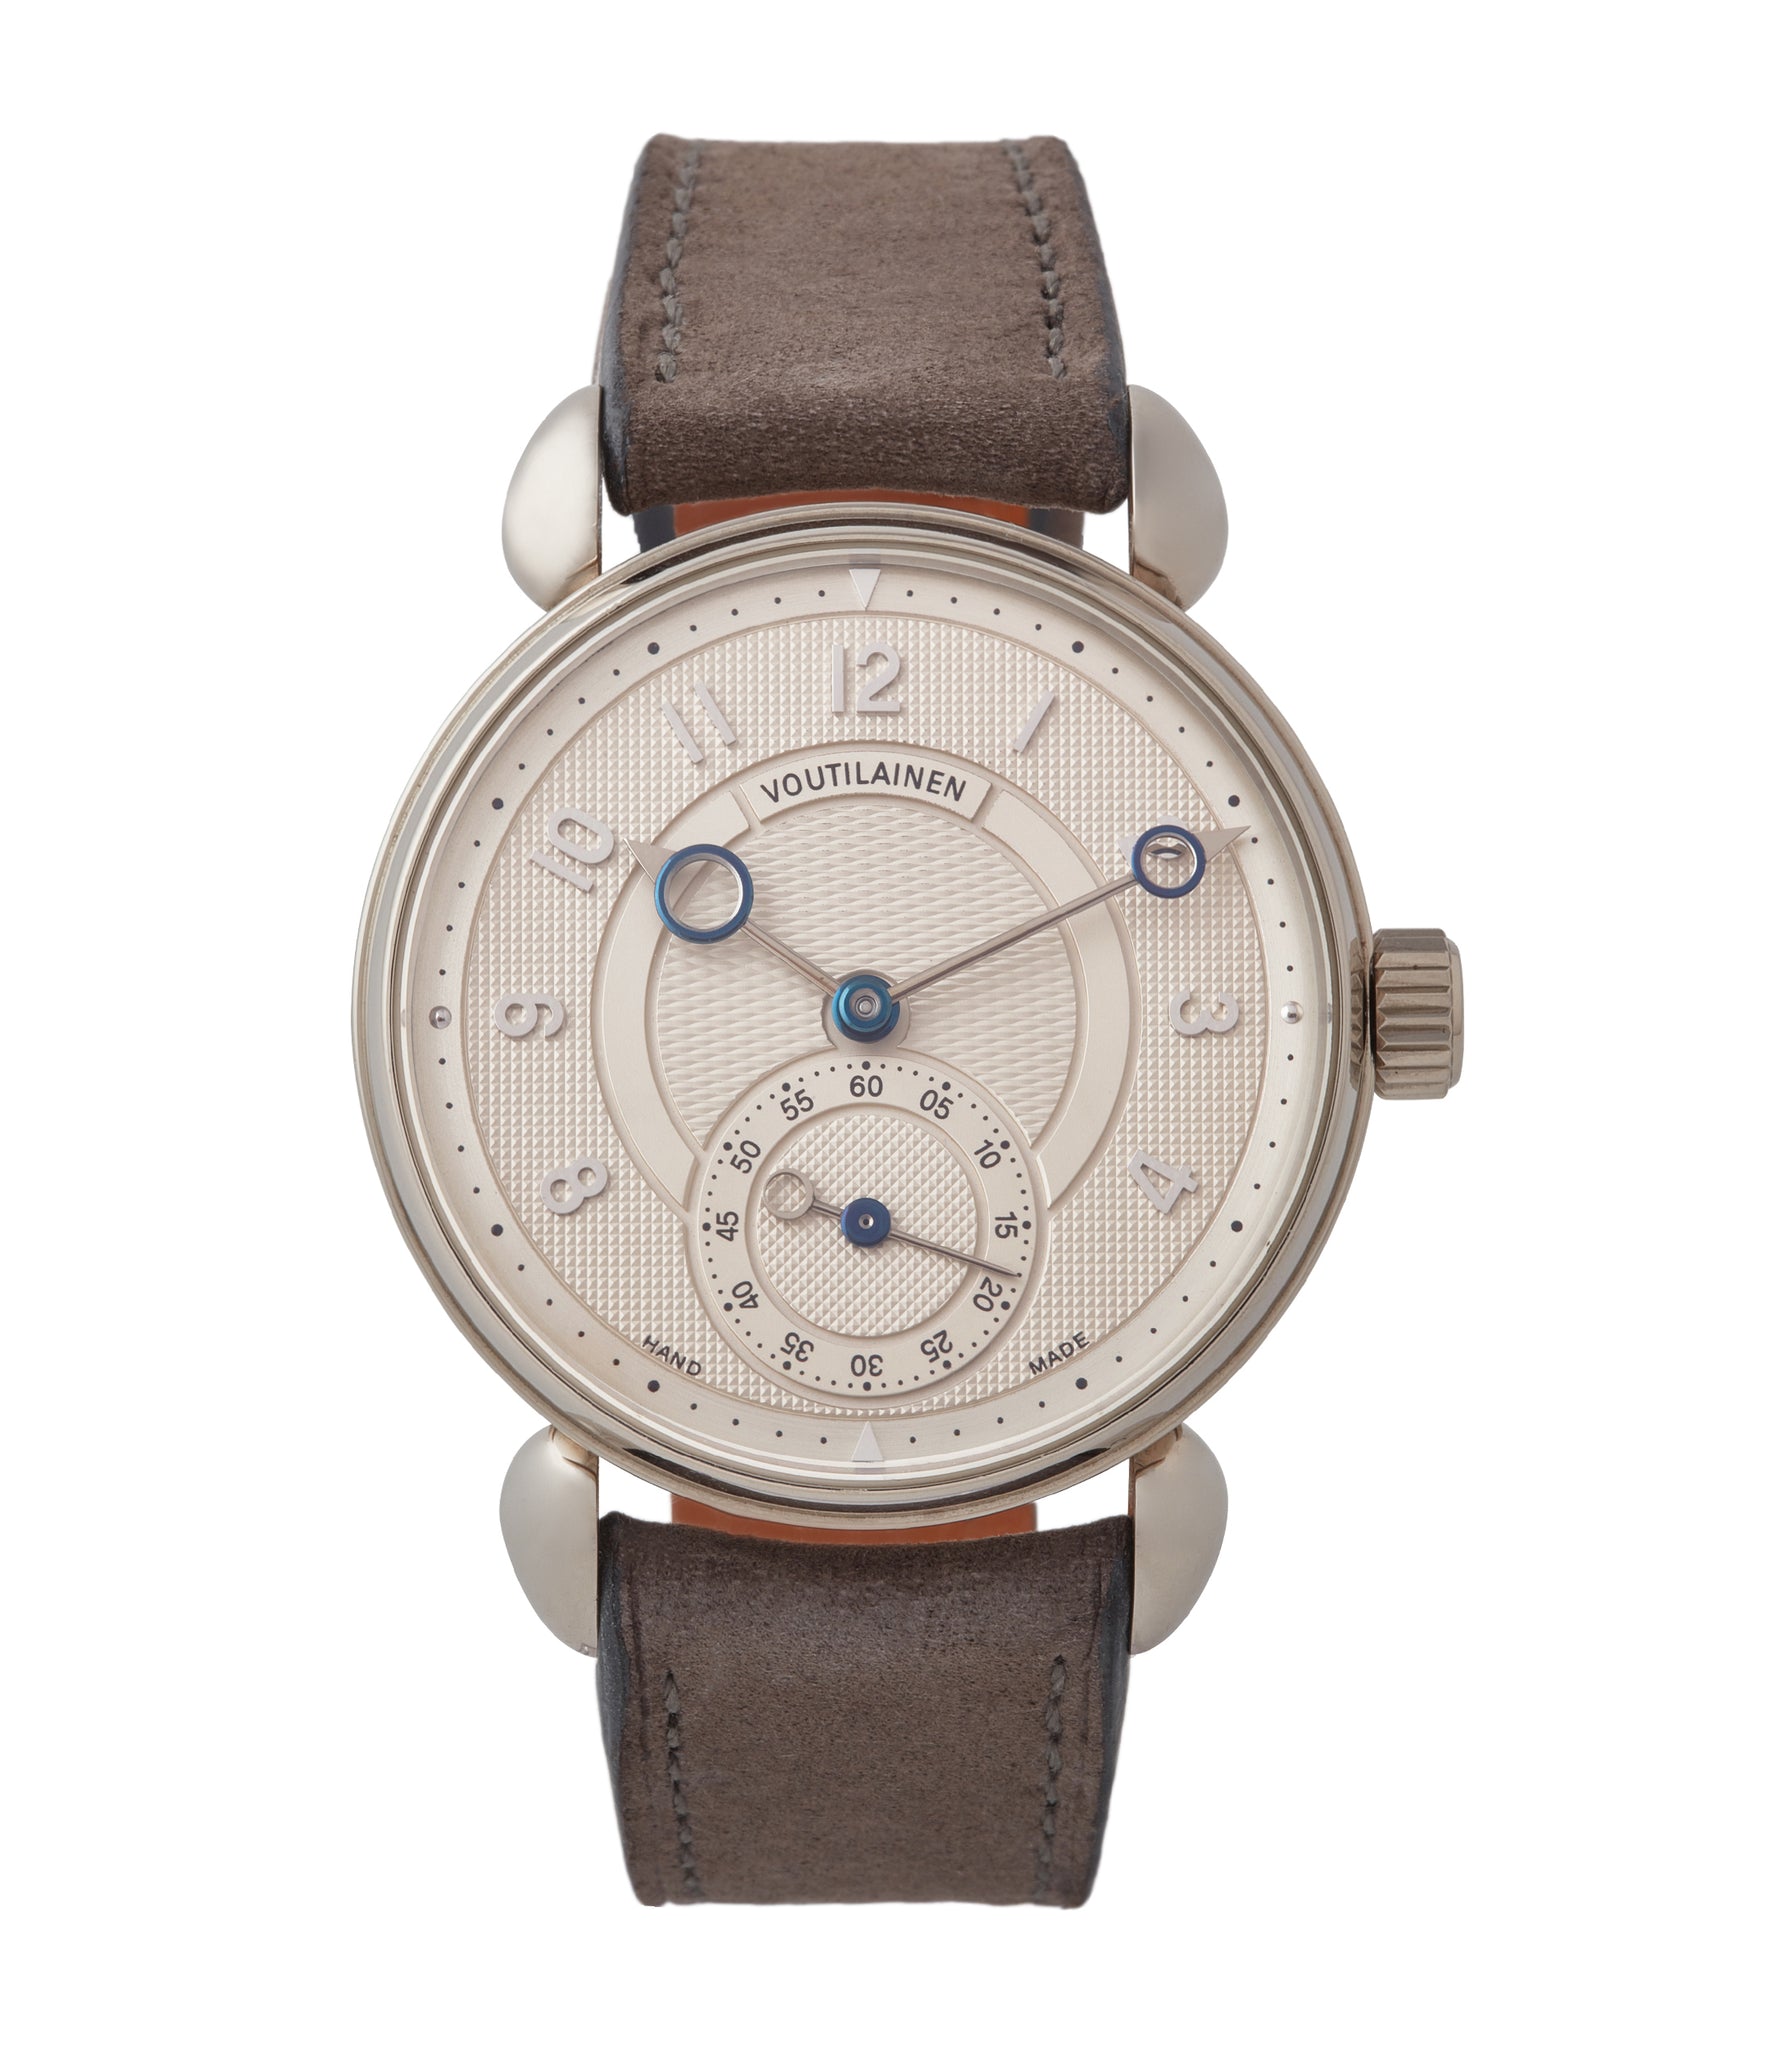 Buy Voutilainen Observatoire Limited Edition white gold dress watch independent watchmaker for sale online at A Collected Man London